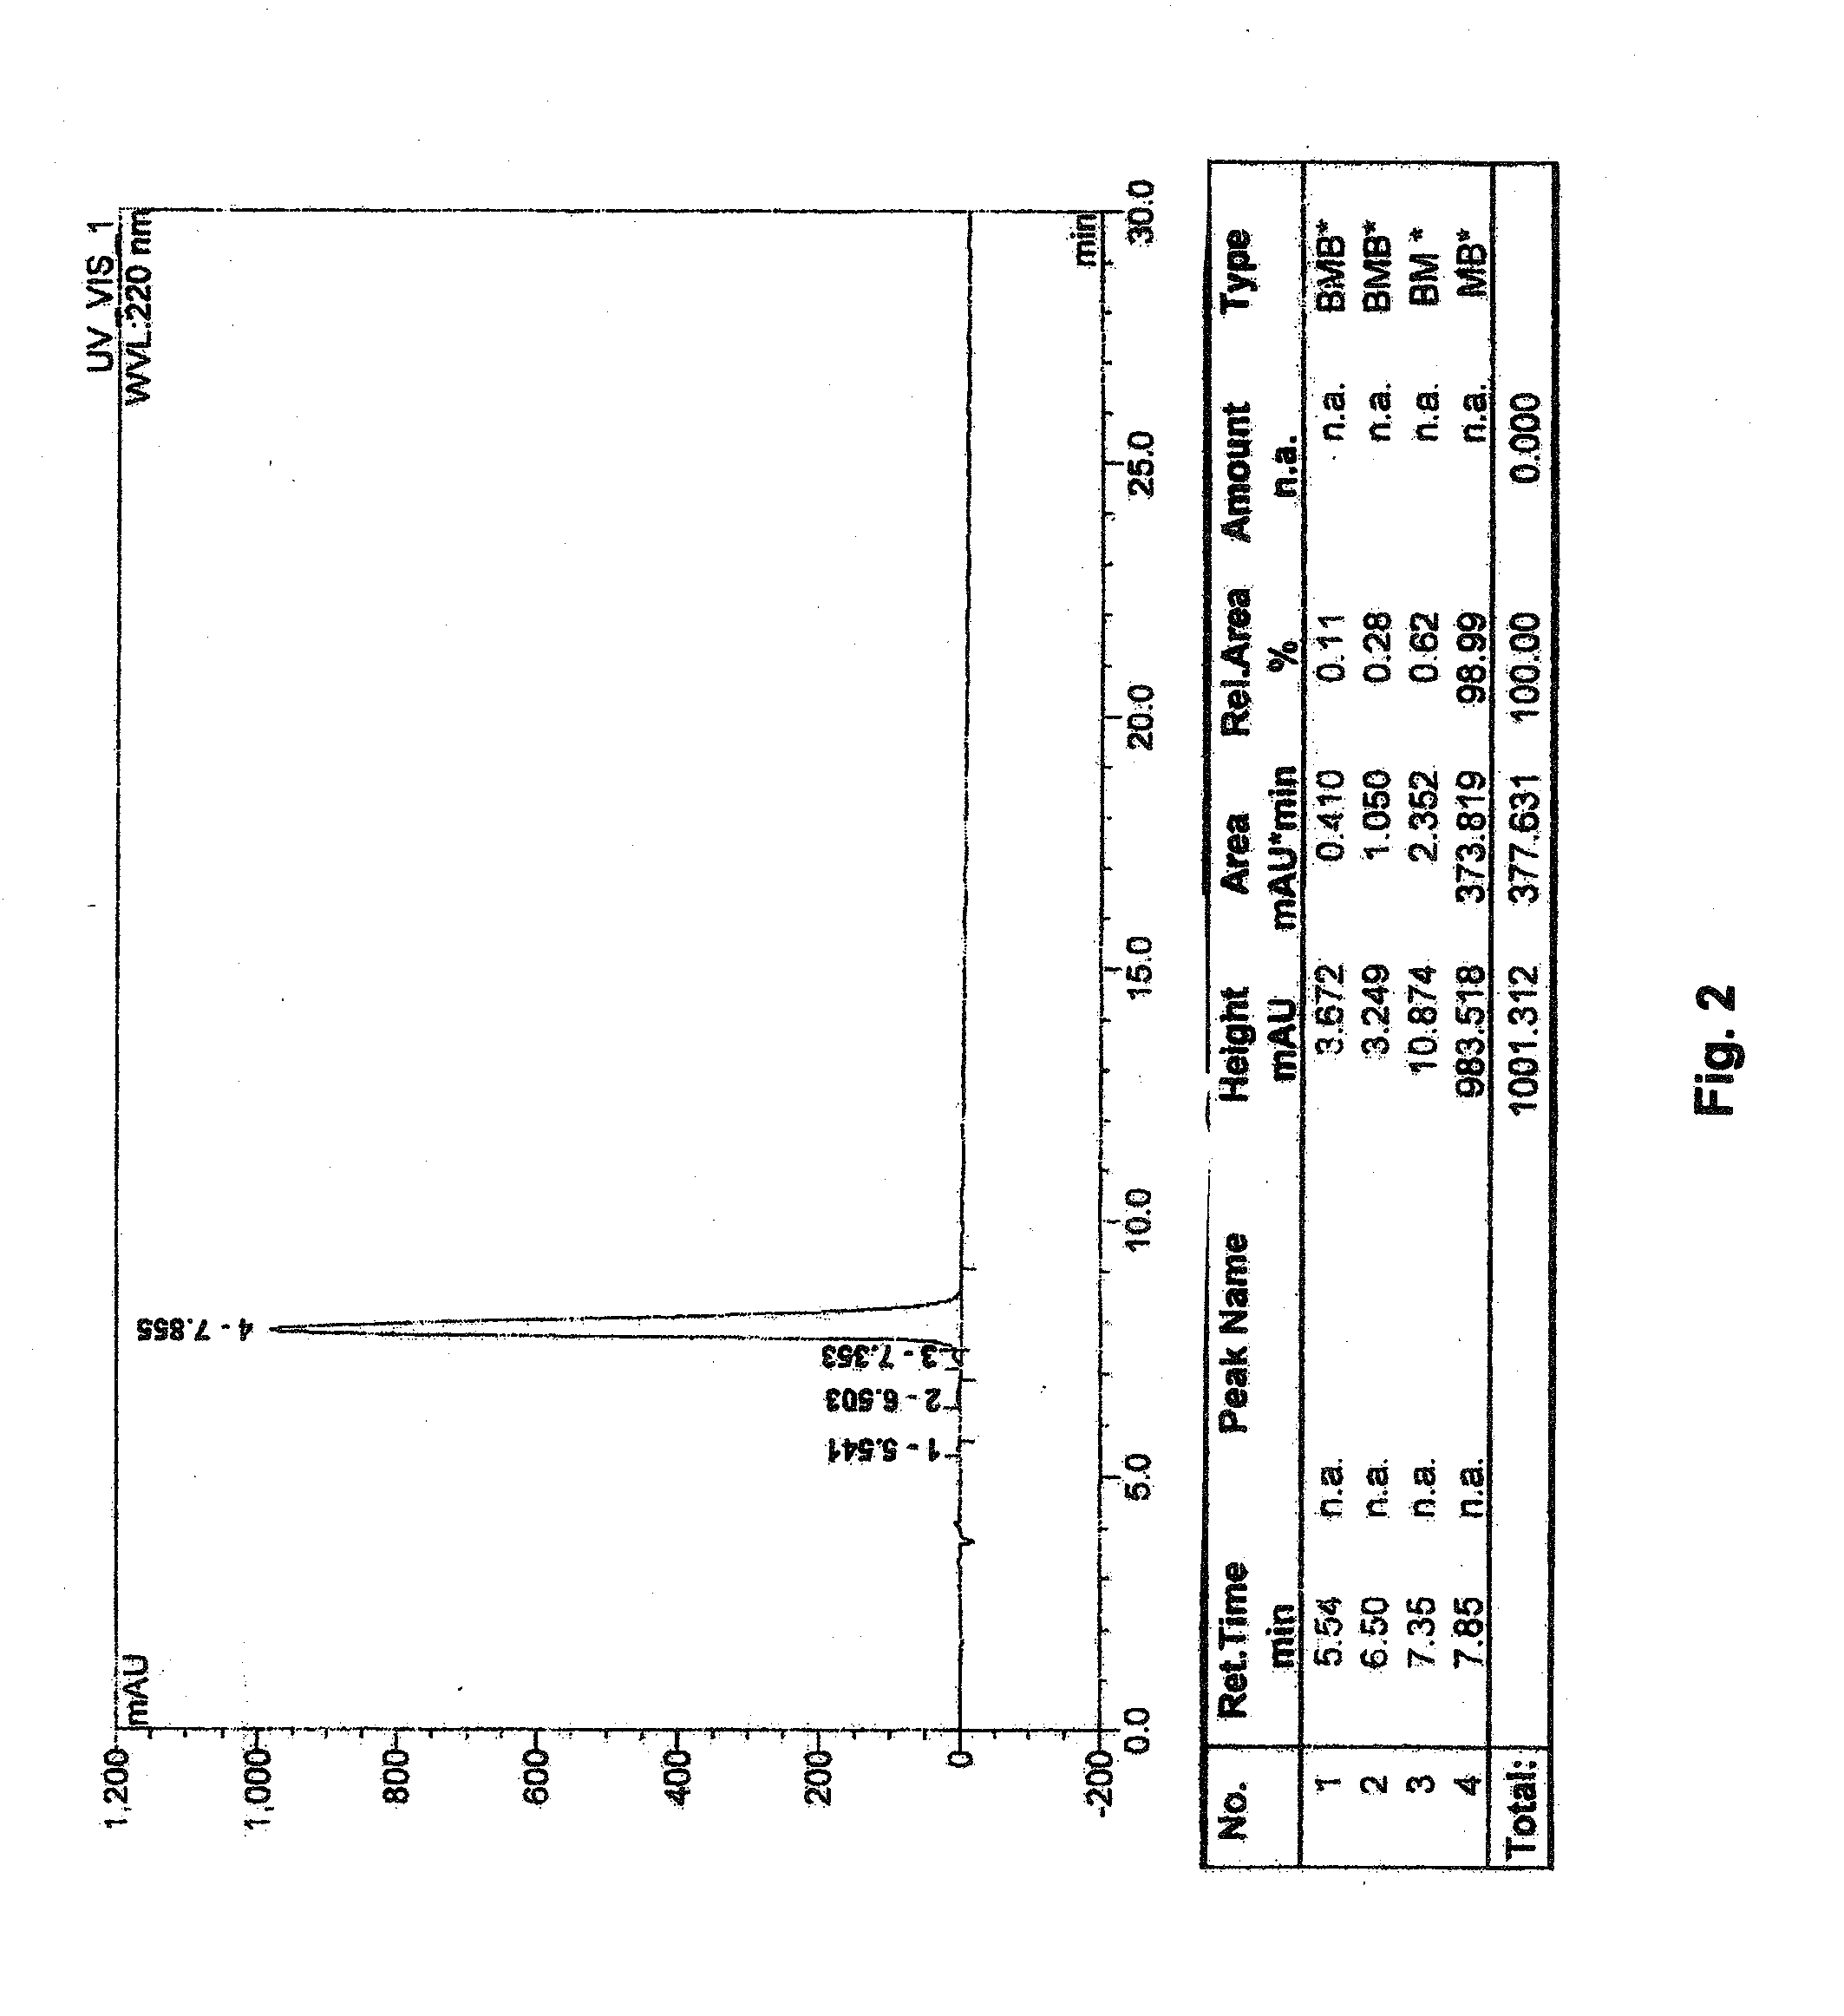 Compositions and methods for inhibiting cellular adhesion or directing diagnostic or therapeutic agents to rgd binding sites